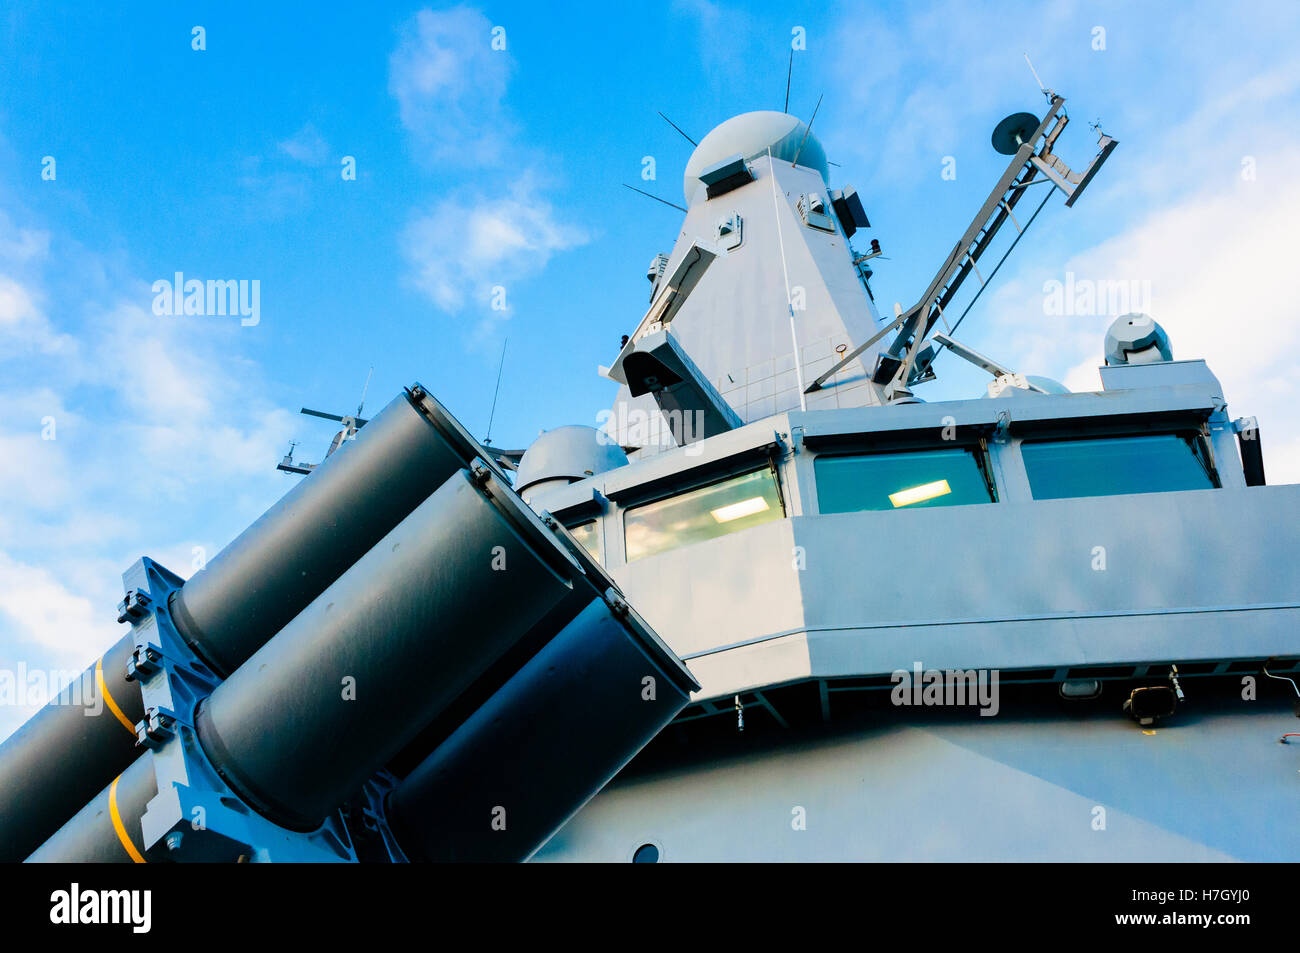 Belfast, Northern Ireland. 4th Nov, 2016. Defense chaff launch tubes of Royal Navy's HMS Duncan  in front of the SAMPSON radar system used to control the Sea Viper missile system © Stephen Barnes/Alamy Live News Credit:  Stephen Barnes/Alamy Live News Stock Photo